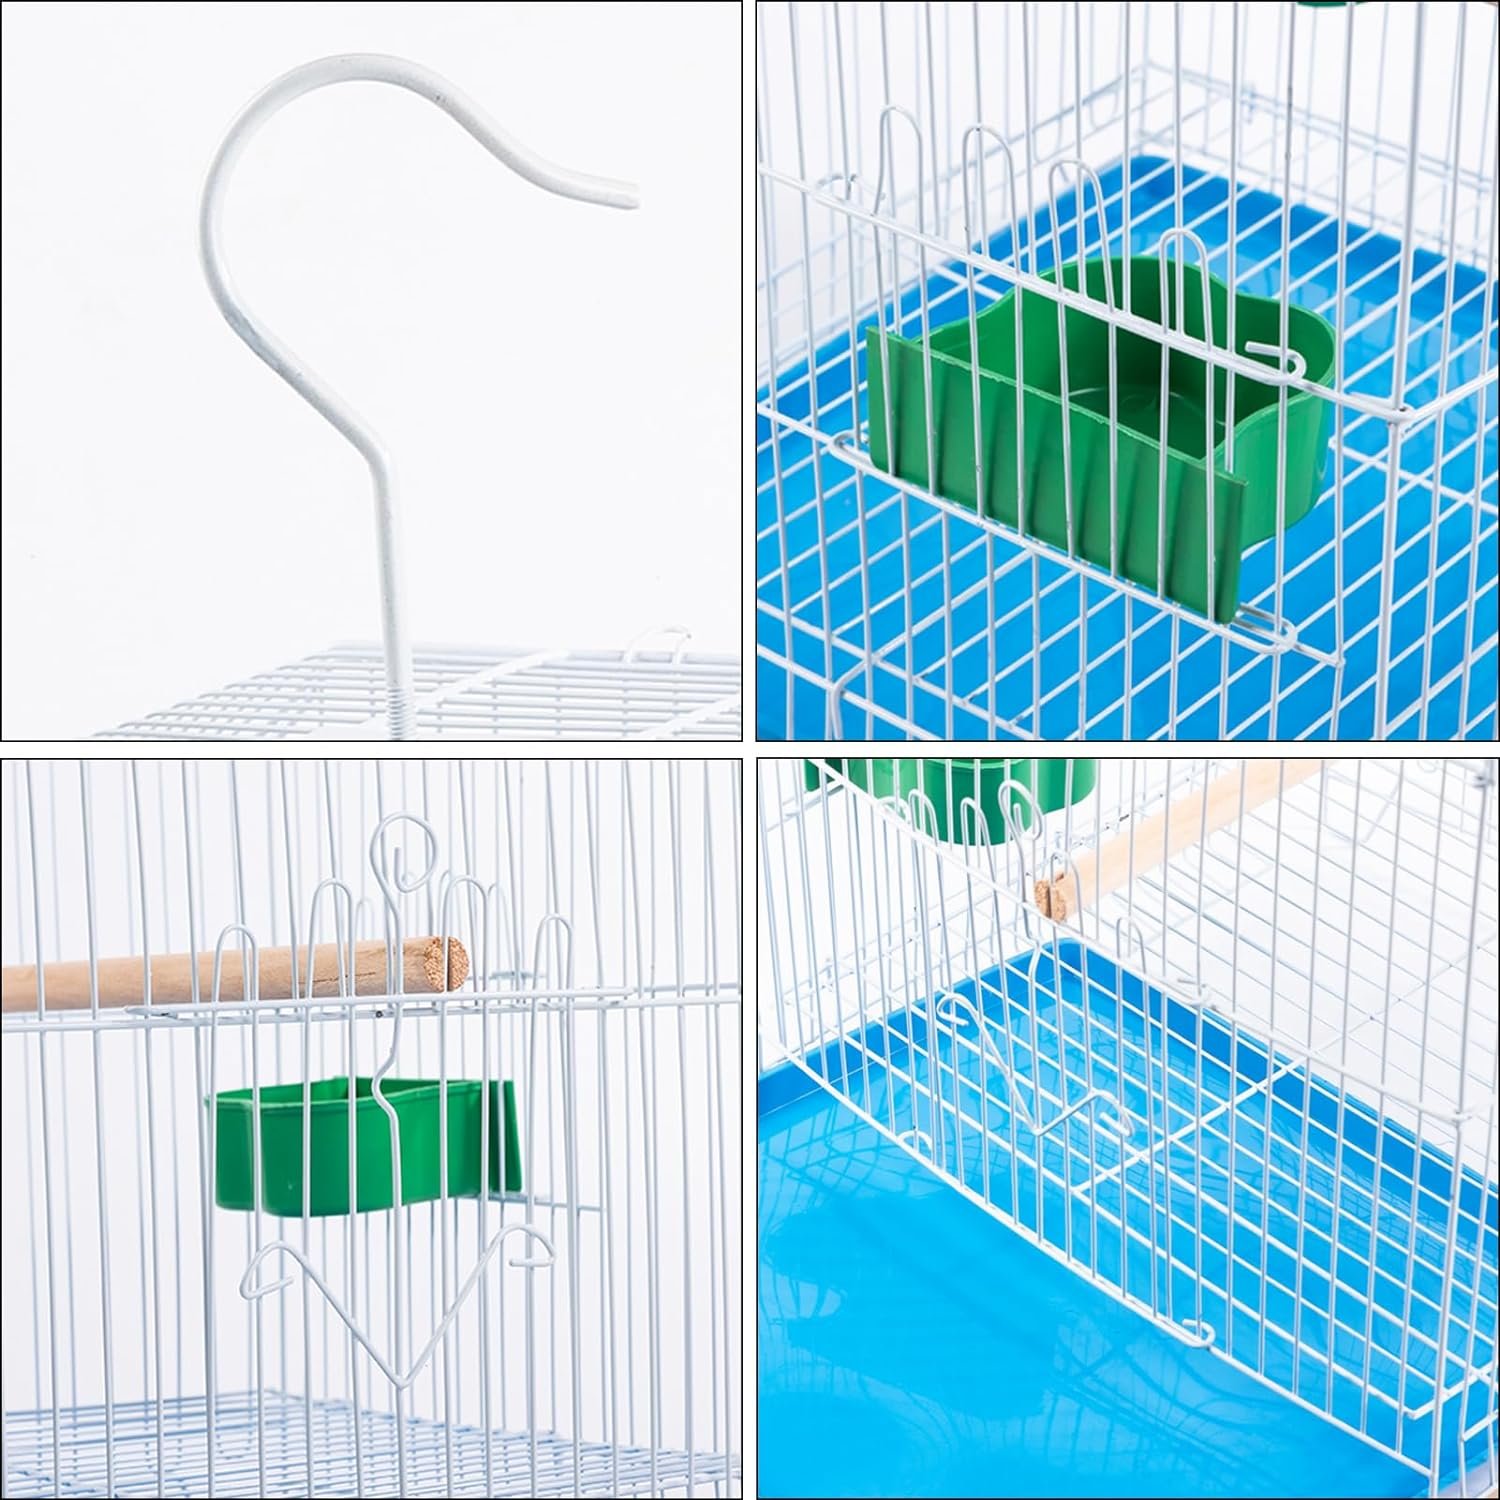 Kuzino Small Bird Travel Cage - Economy and Lightweight Small Birds Carrier Cages for Parakeets Lovebirds Parrotlets Finches Canaries with White Wire, Blue Plastic Base with Removable Tray